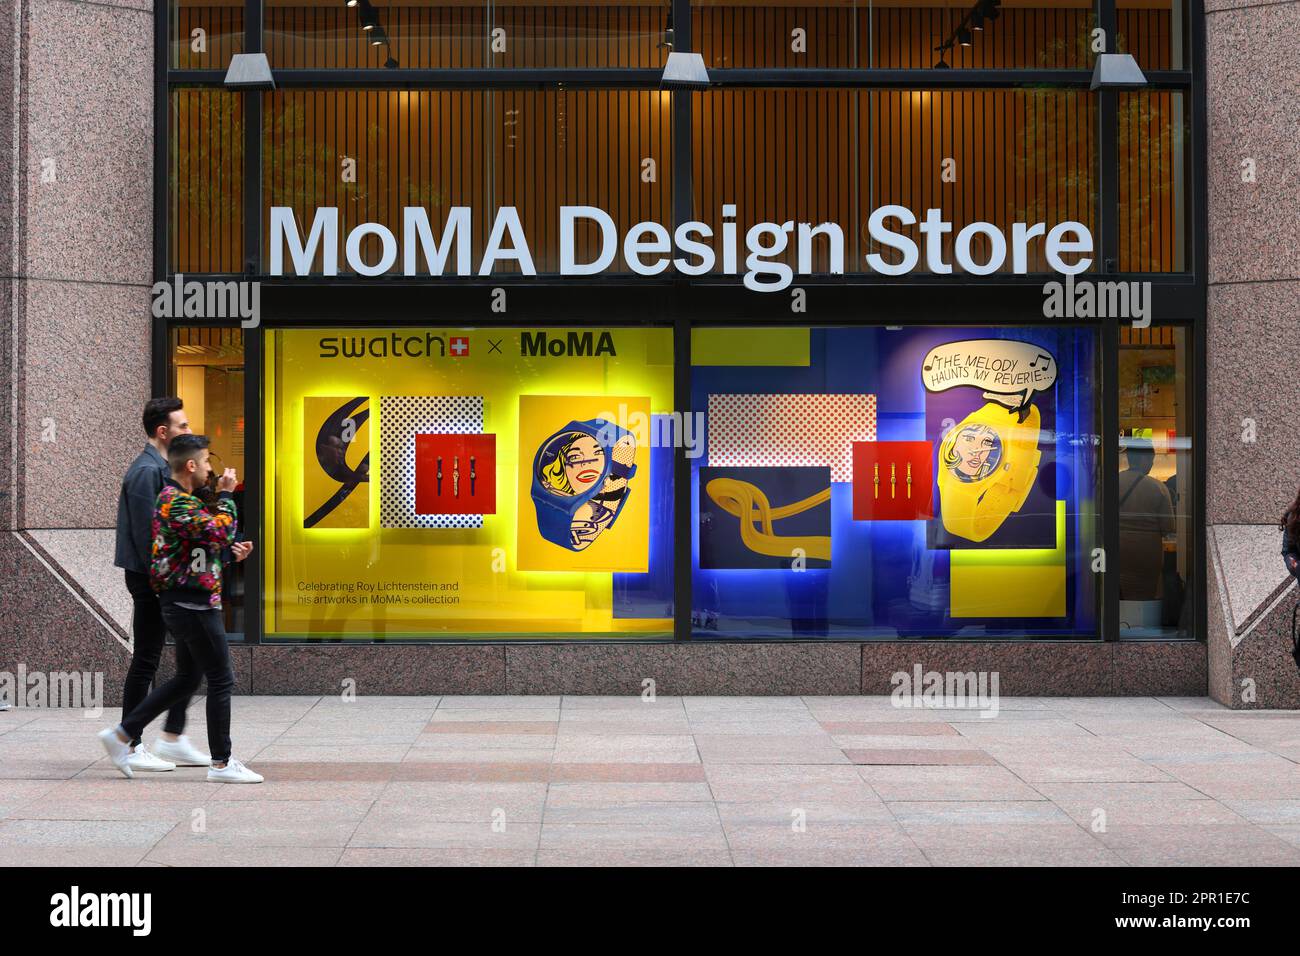 MoMA Design Store, 44 W 53rd St, New York, NYC storefront of a museum shop in Midtown Manhattan. Window display with a Swatch x MoMA collab Stock Photo